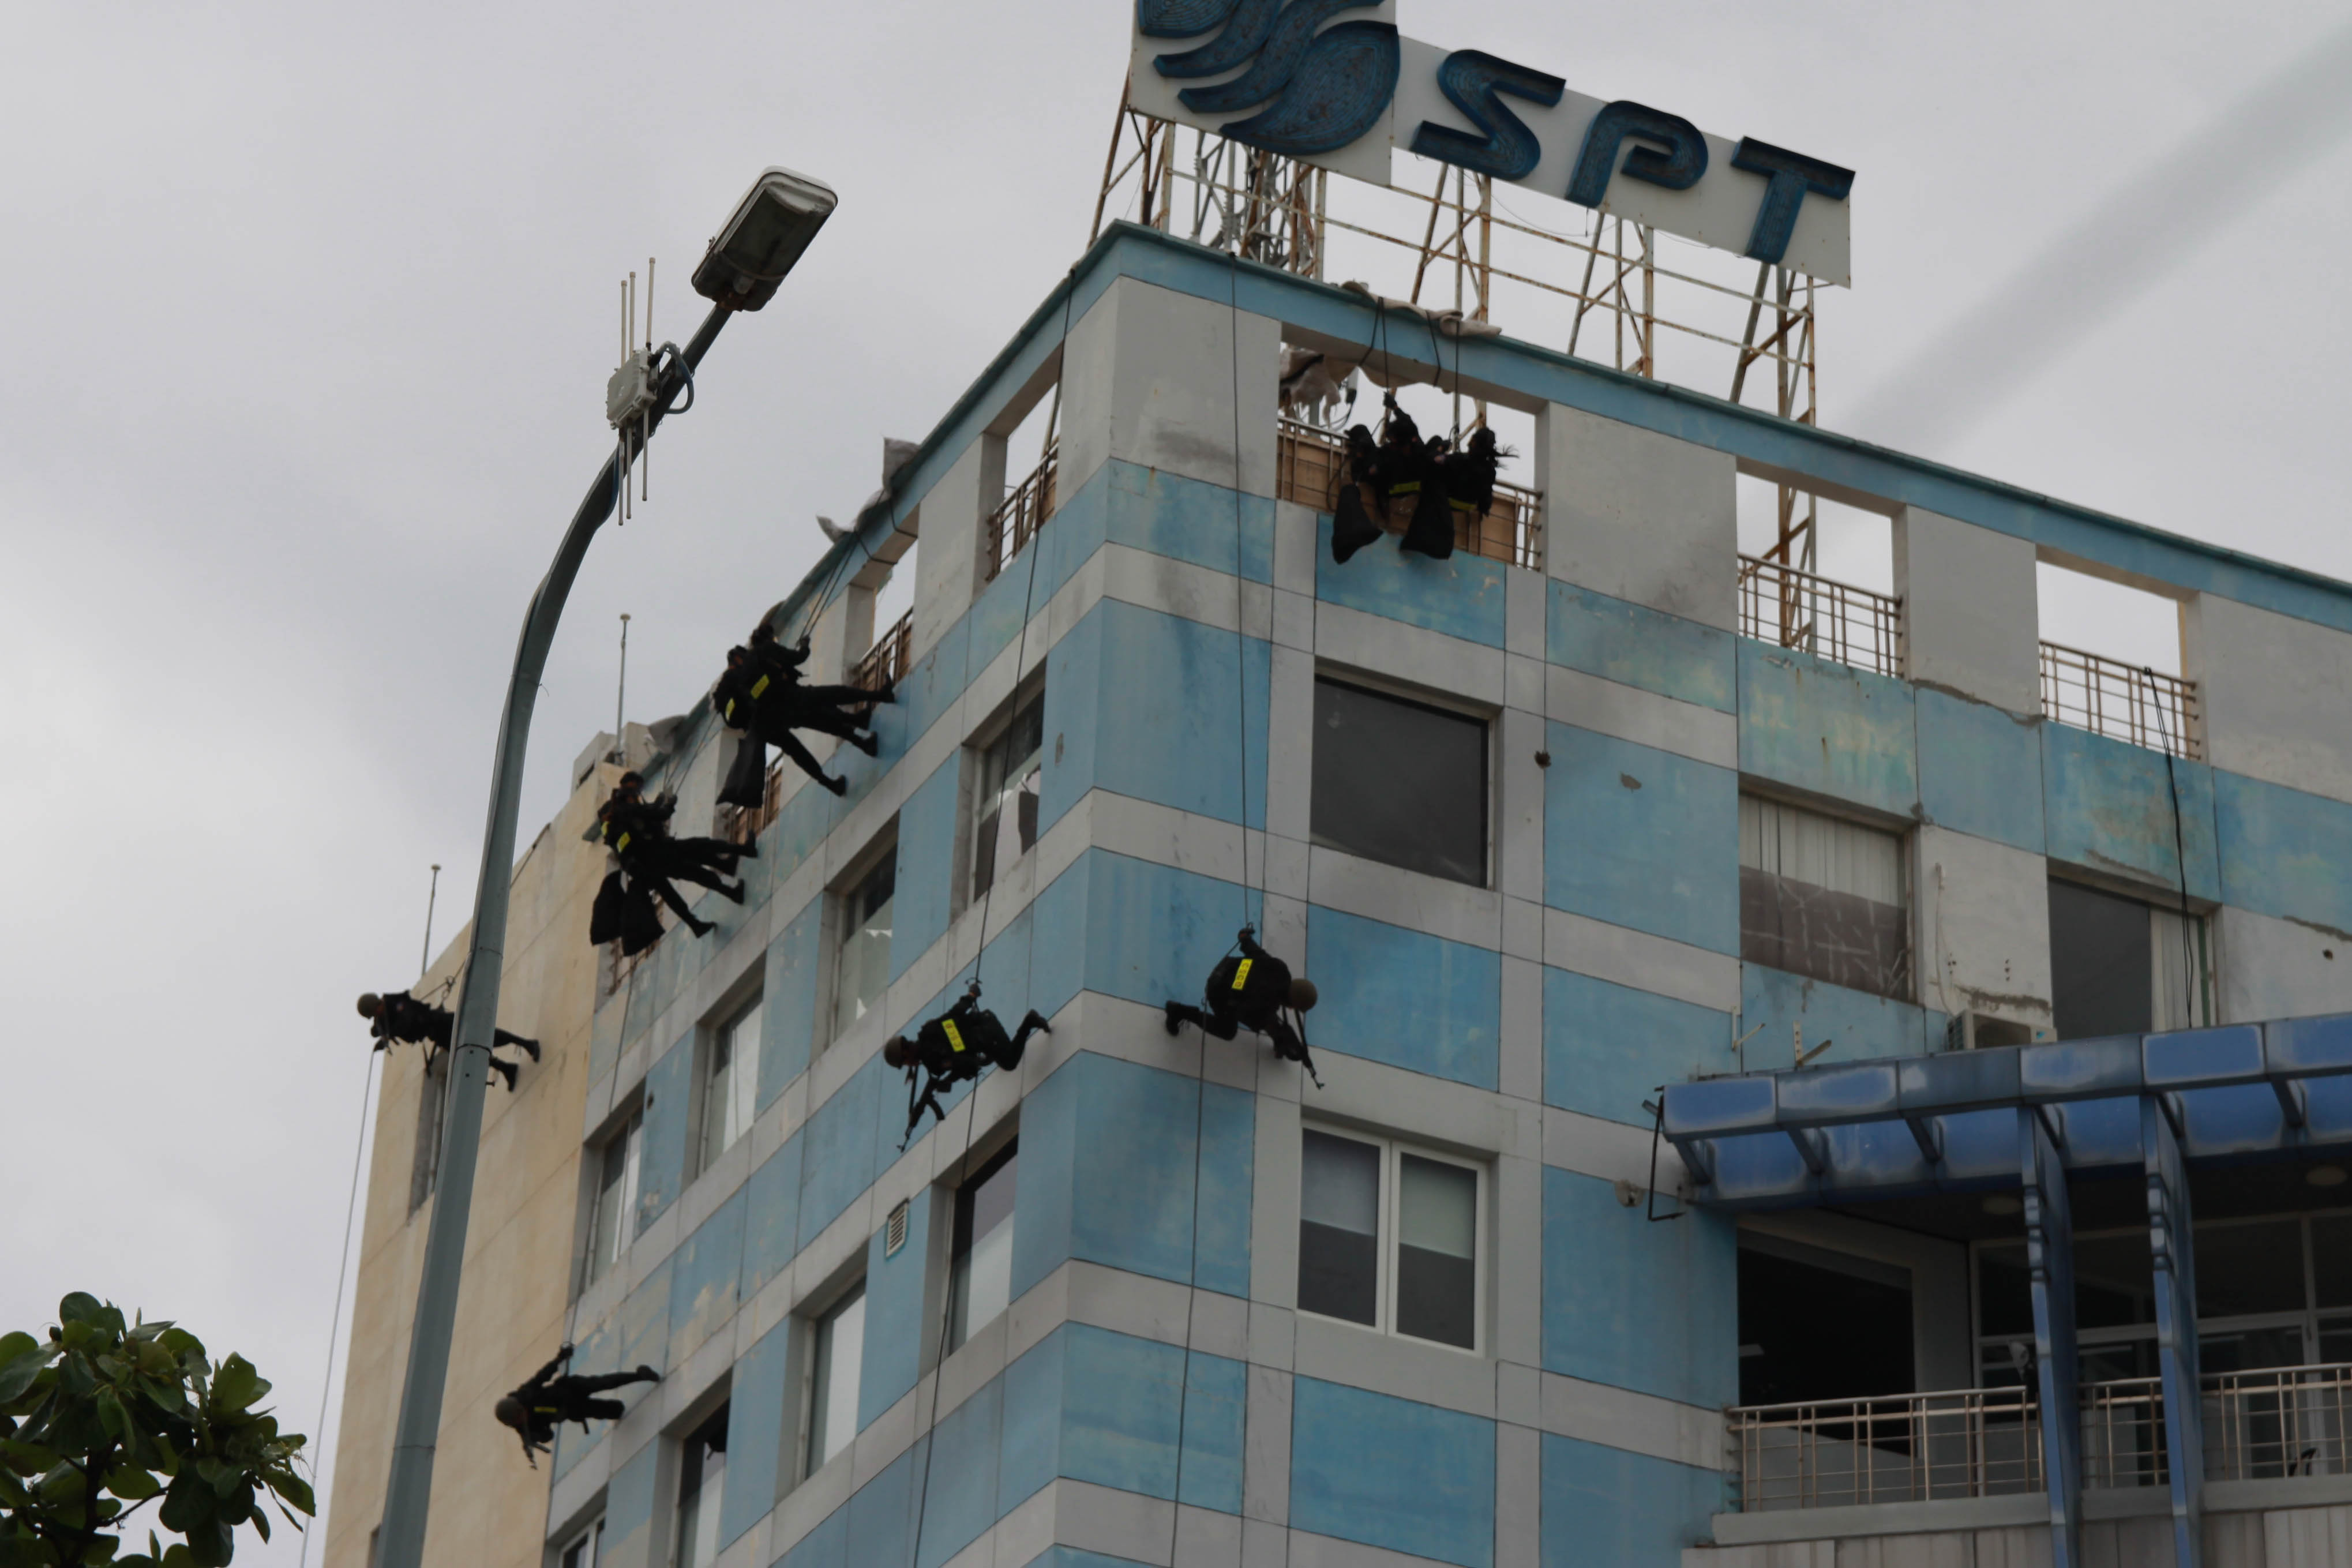 Officers enter the building from the rooftop.